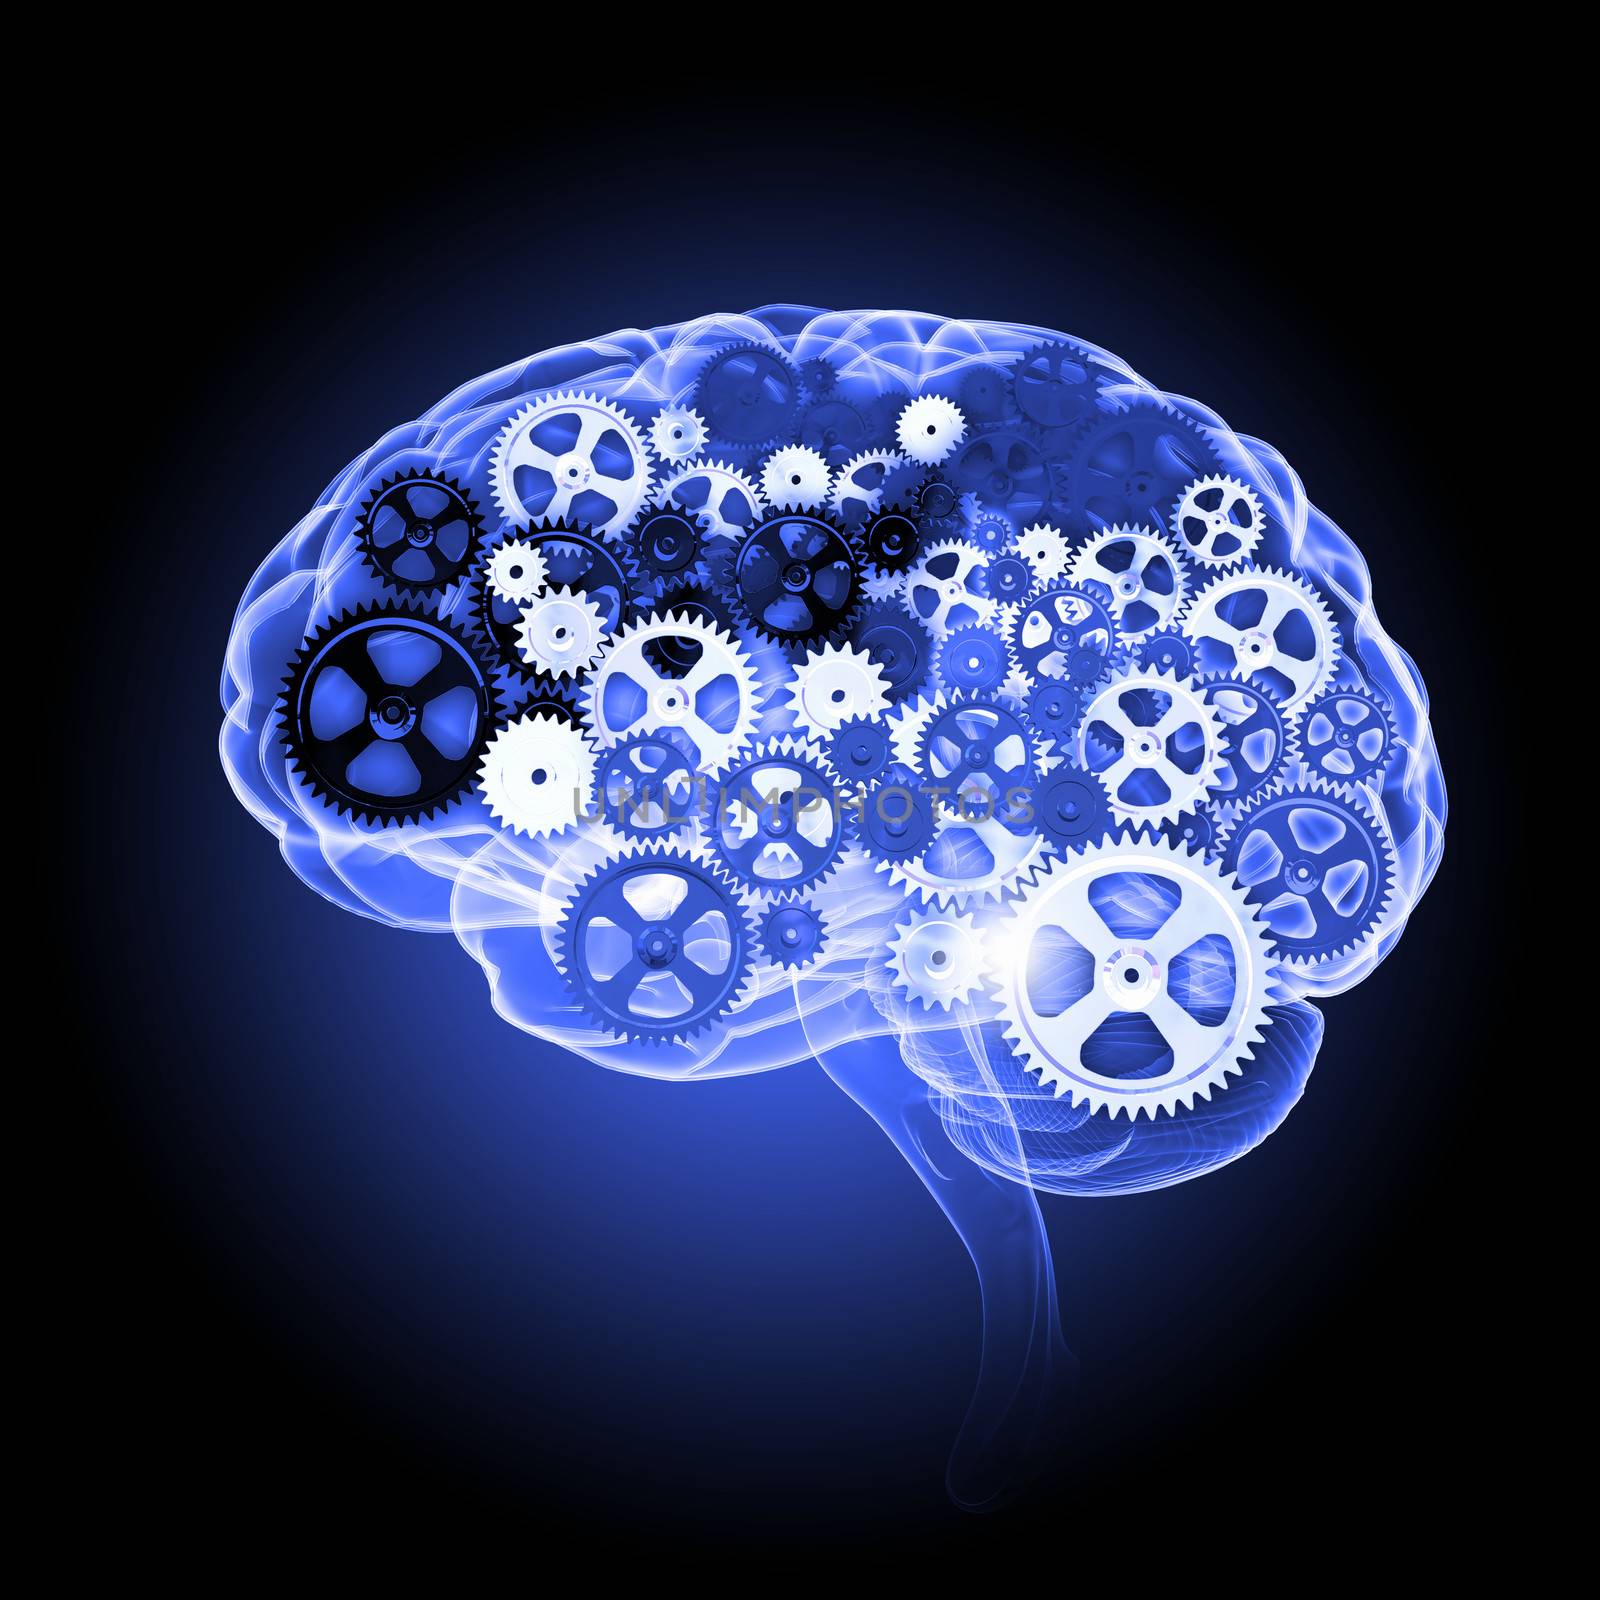 Human brain silhouette with gears and cog wheel elements against black background